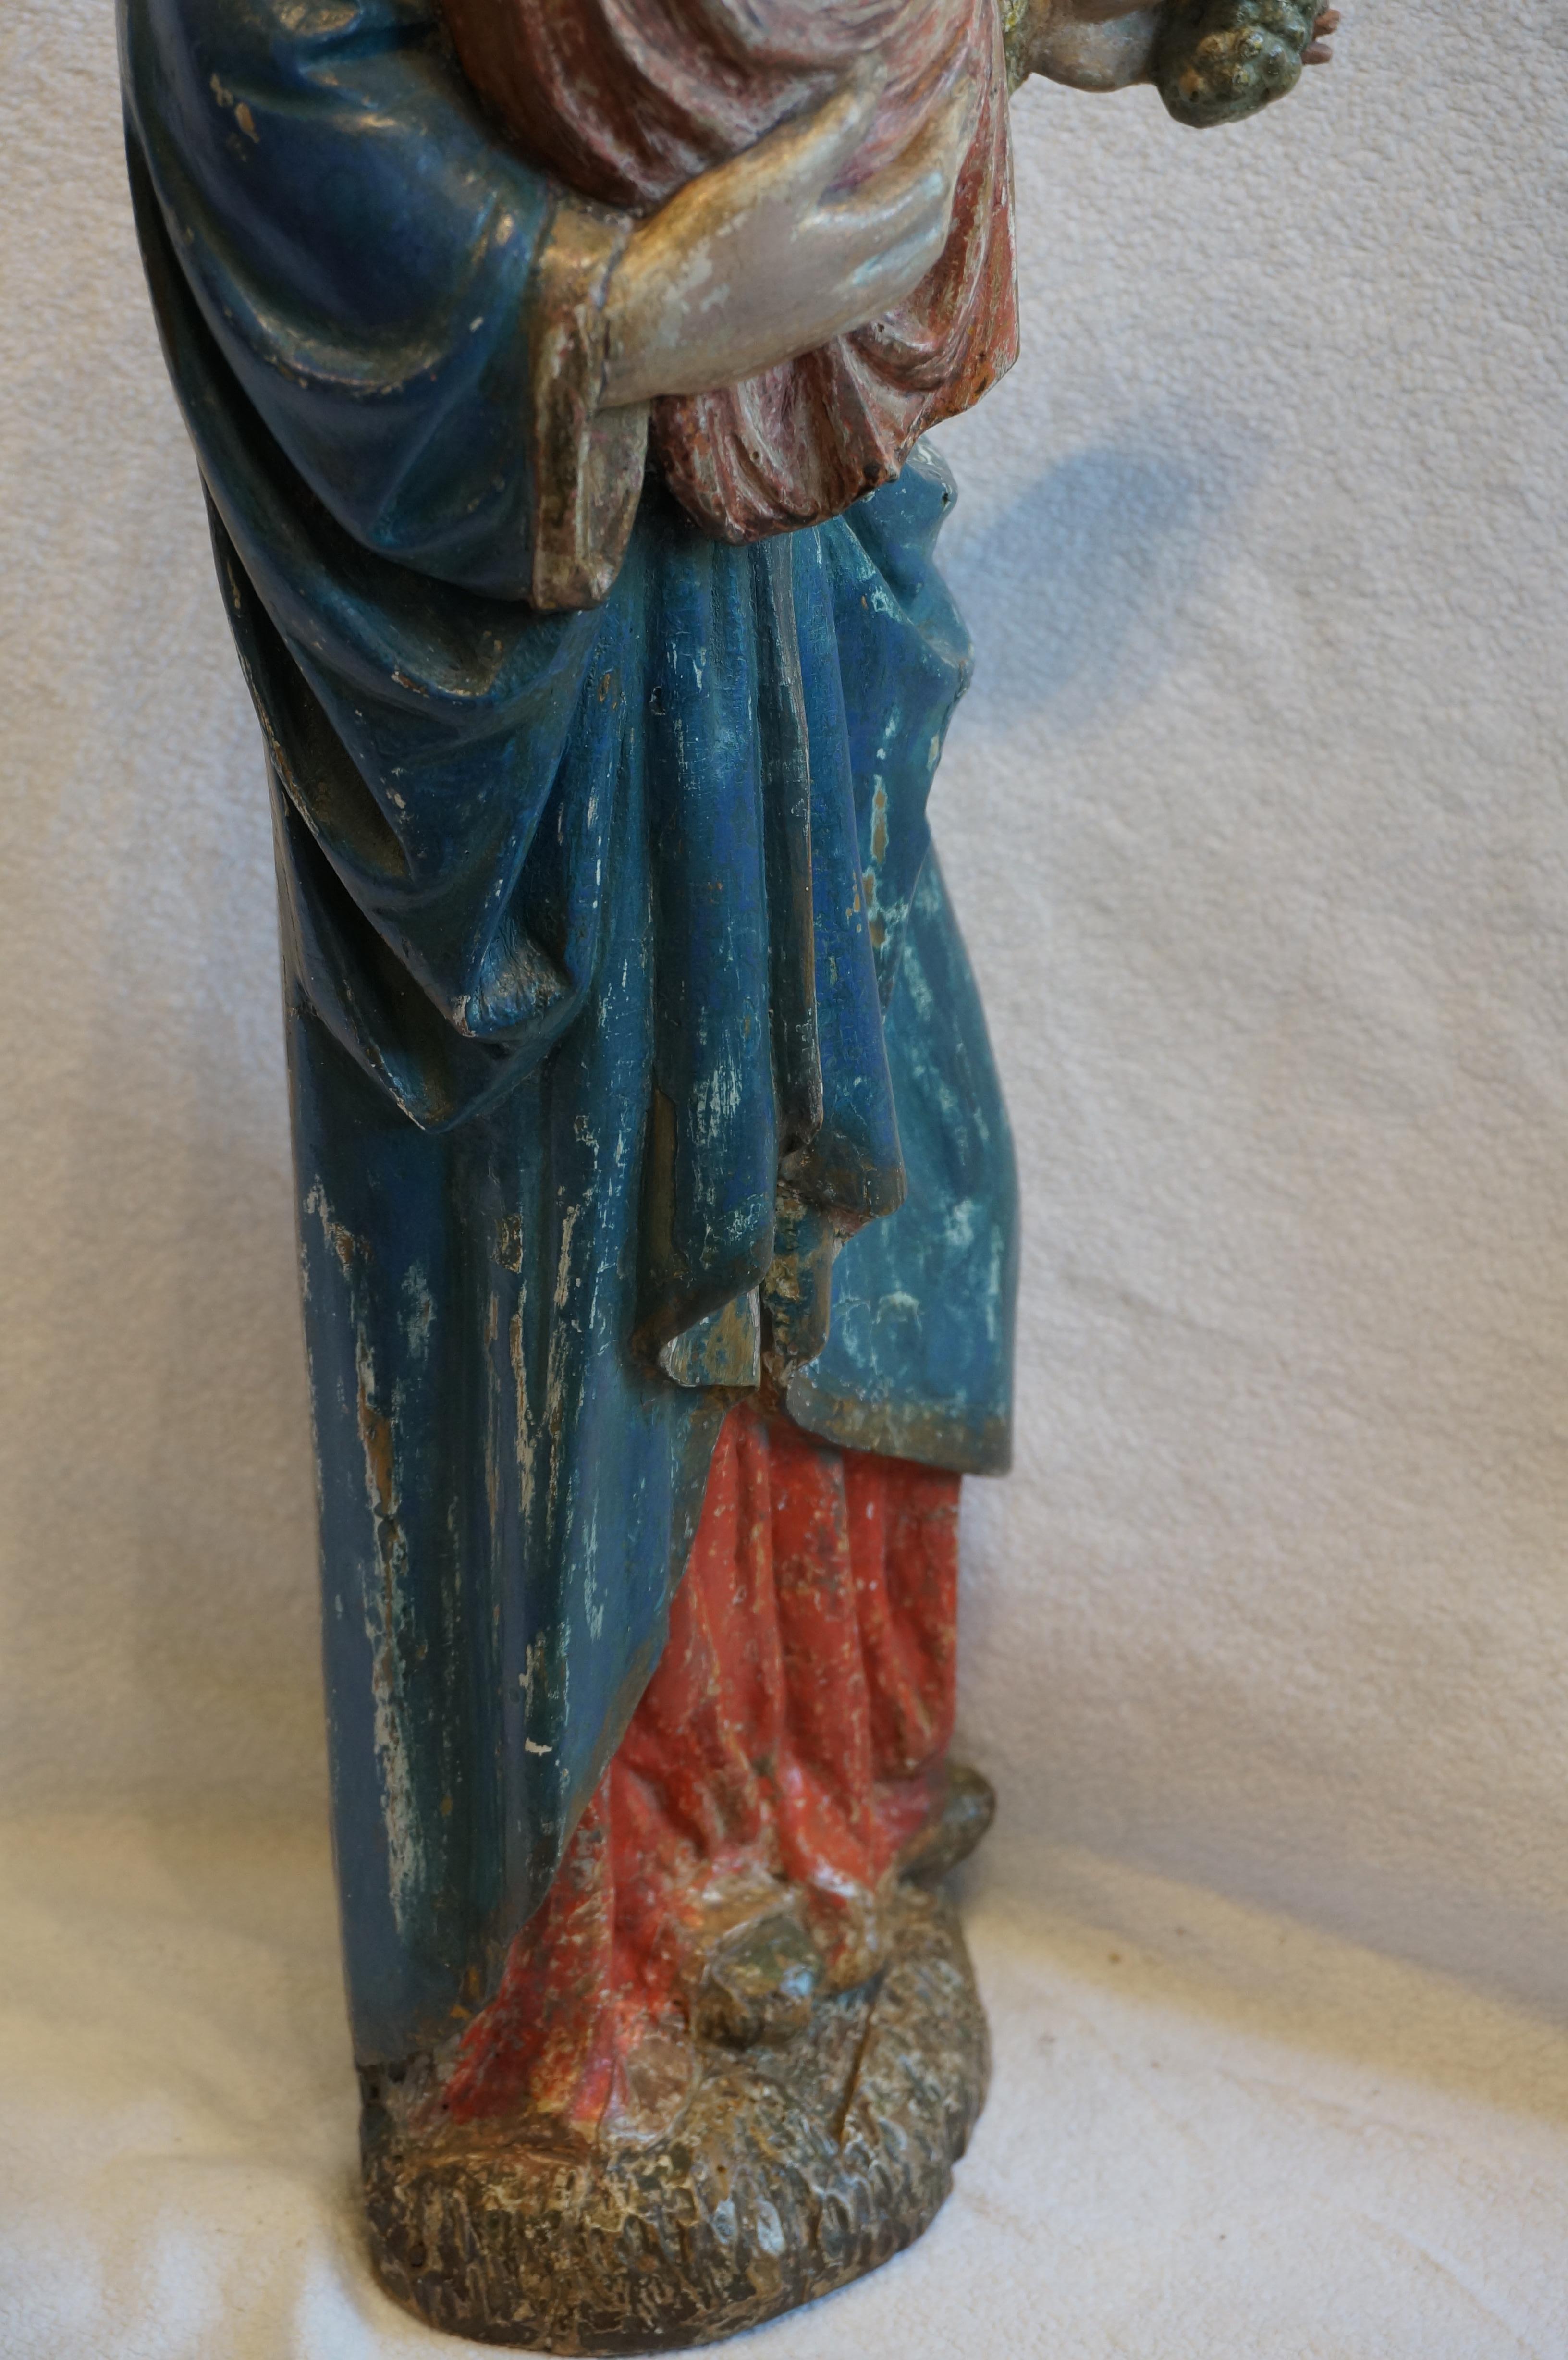 Antique Sculpture of Mary with the Child Jesus, Belgium, early 17th century For Sale 2